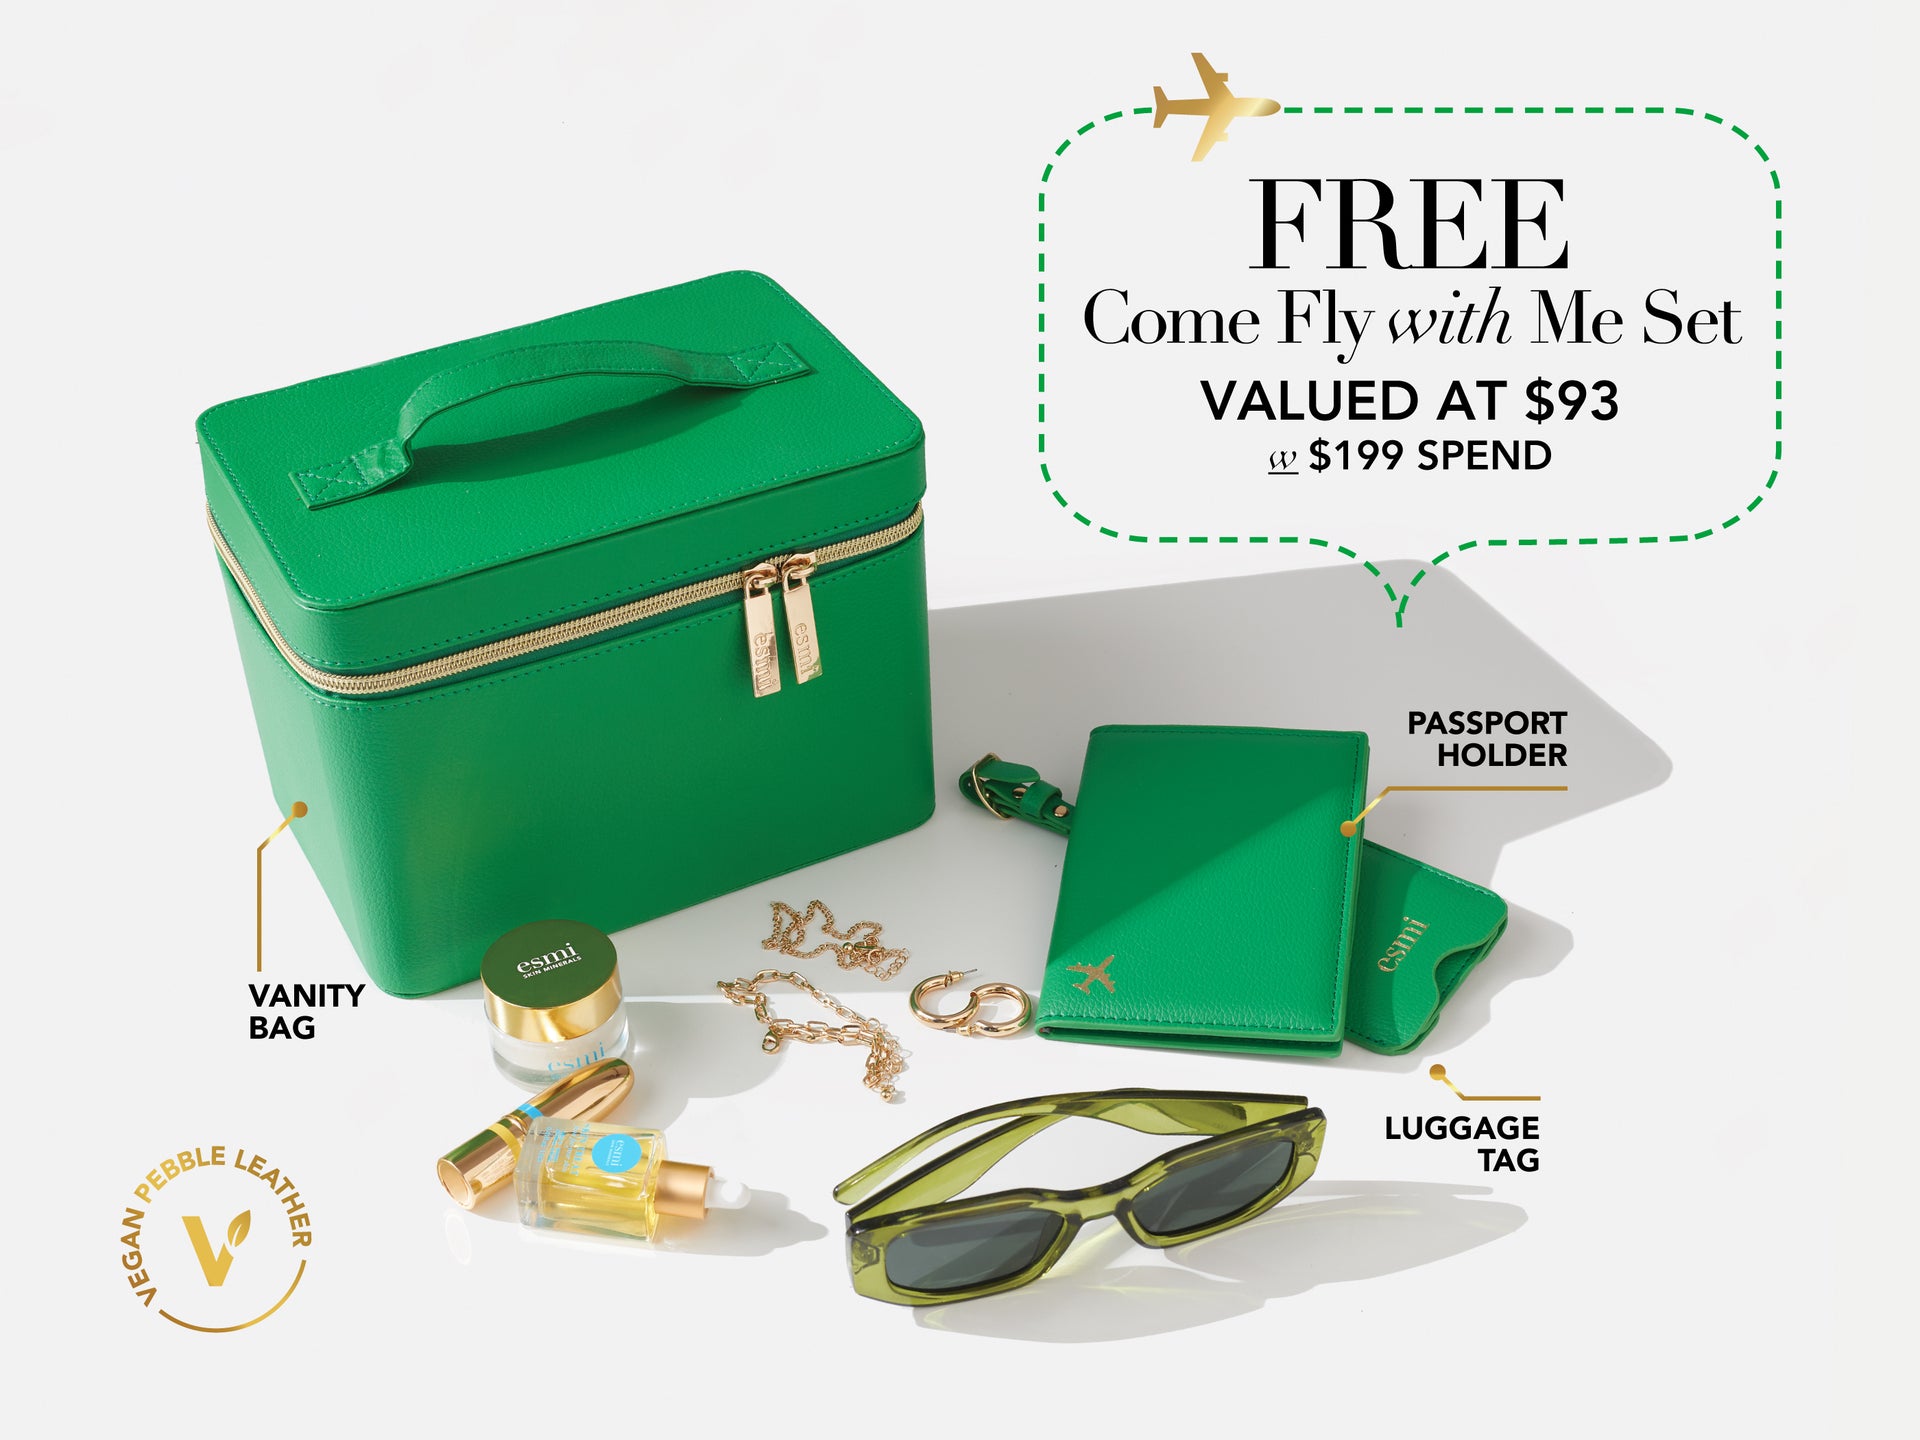 Spend $199 & get a Free Come Fly with Me Set